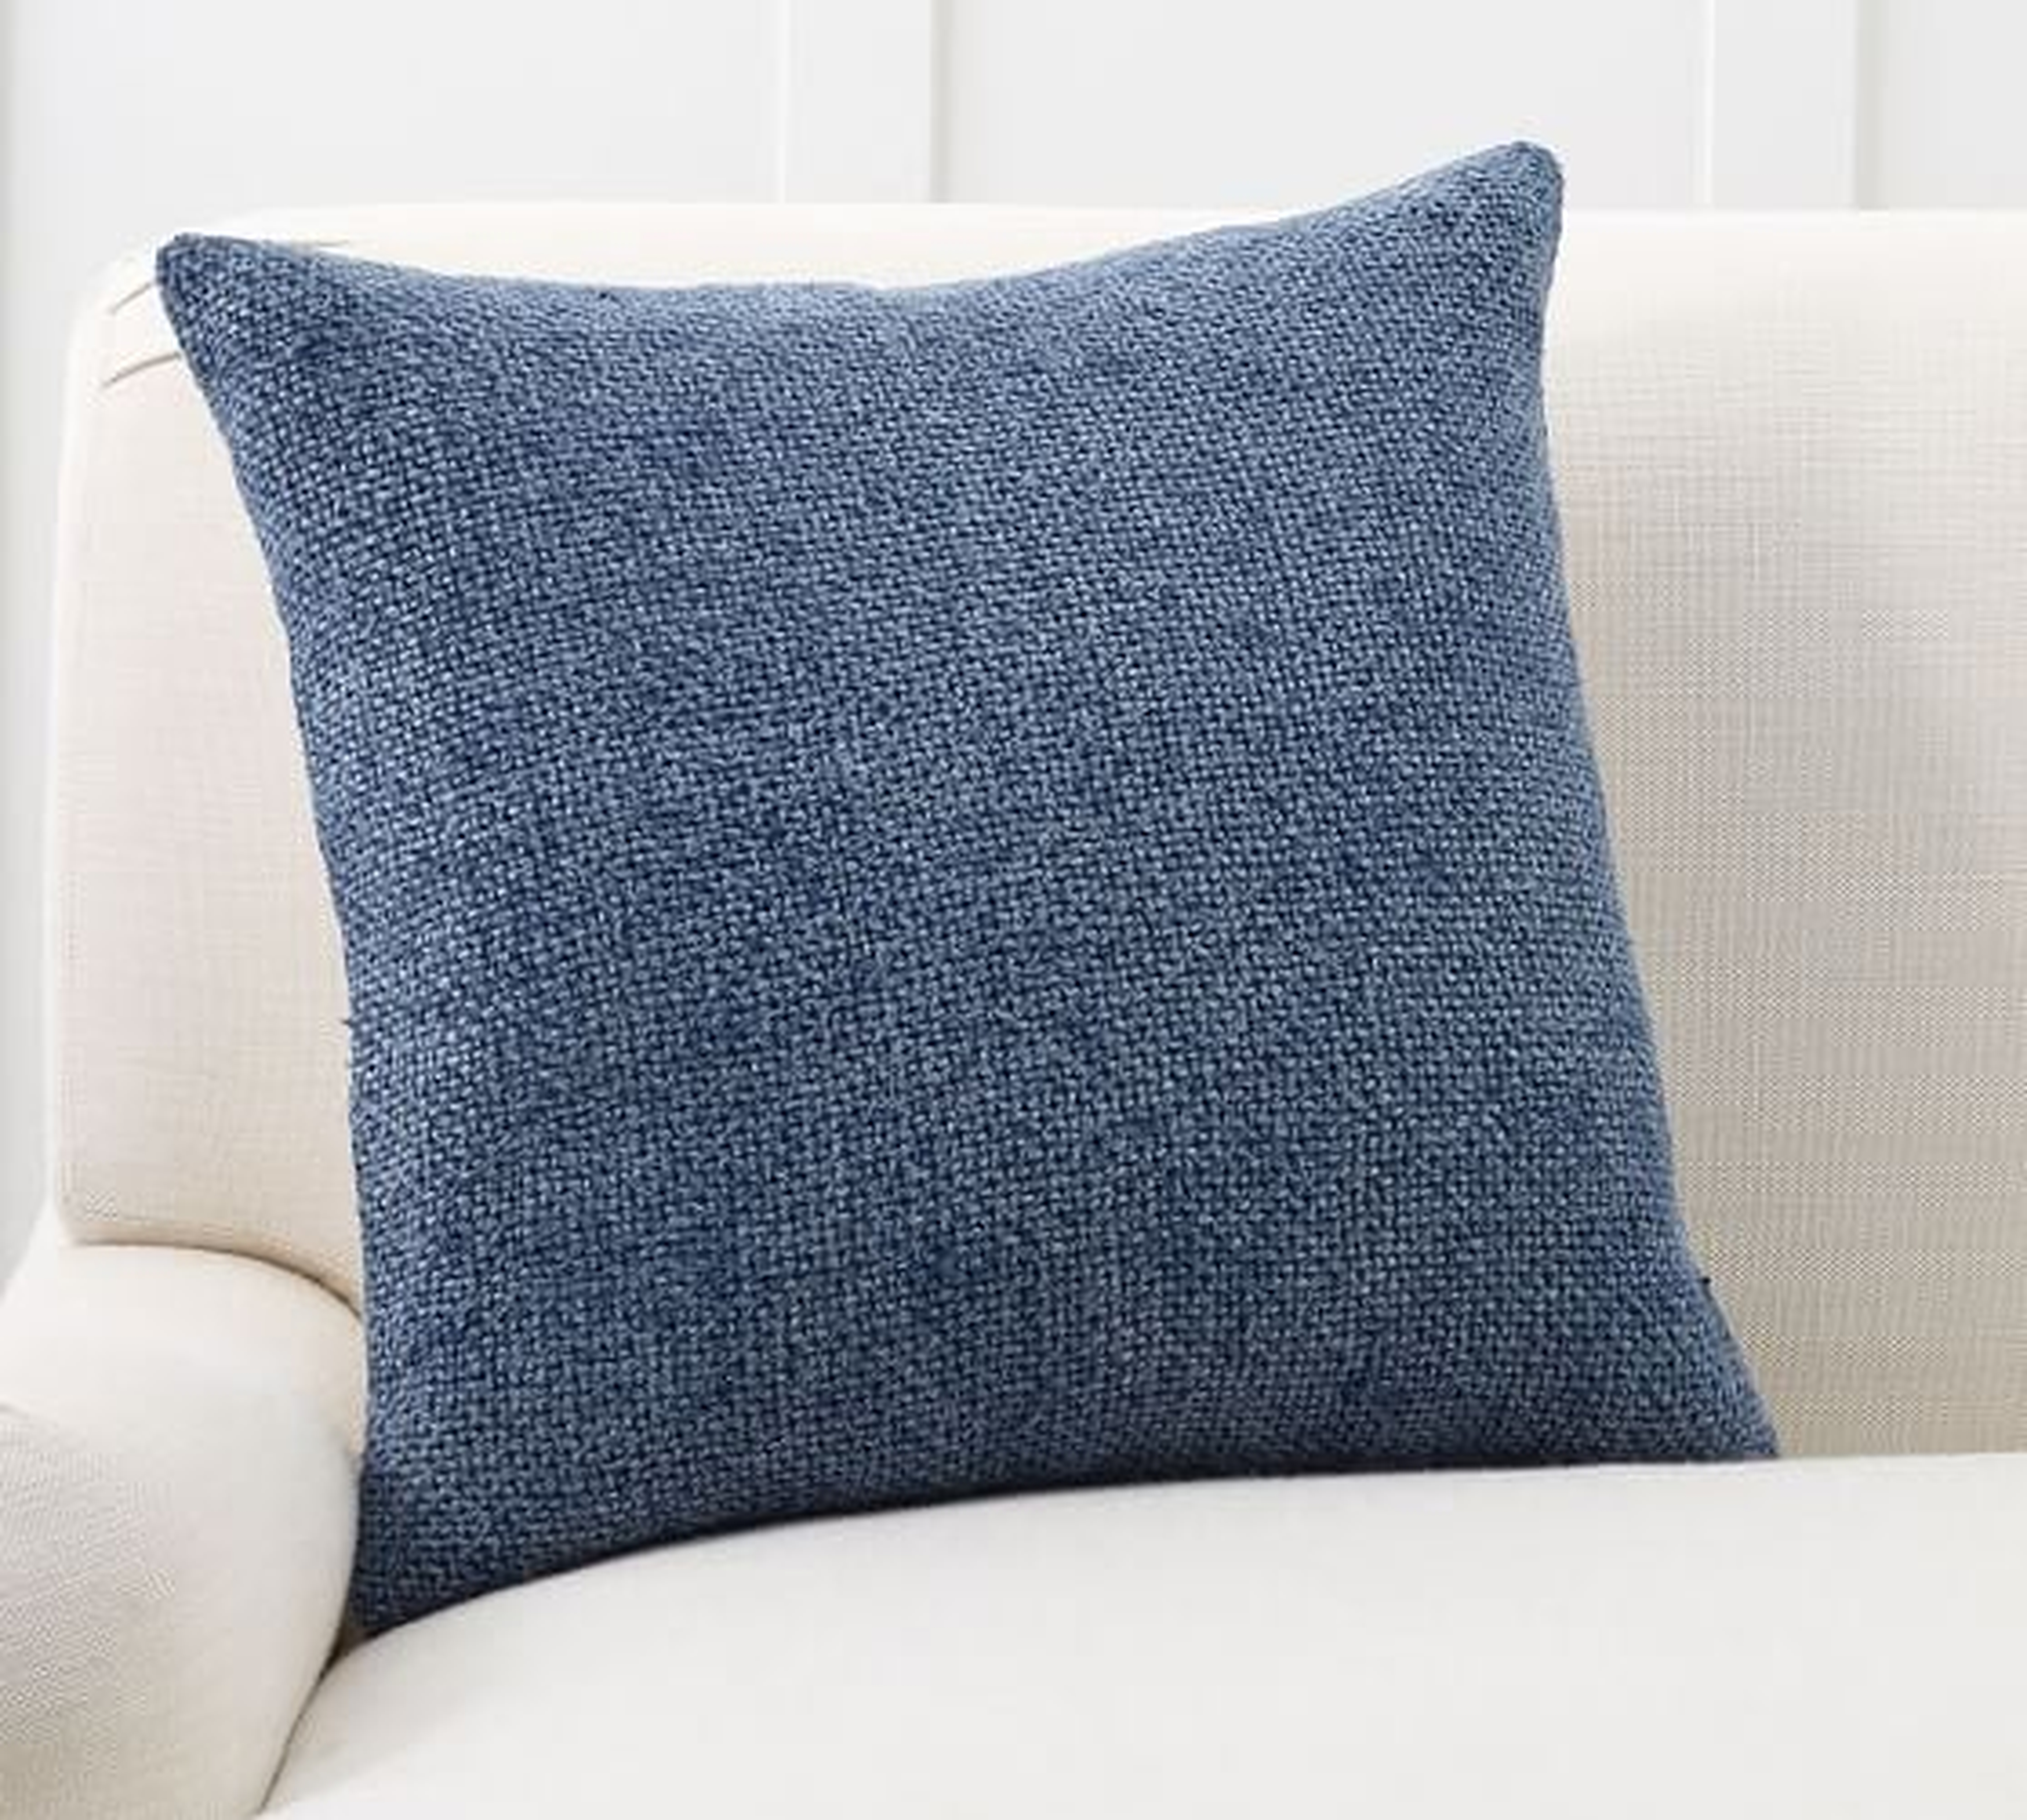 Faye Textured Linen Pillow Cover, 20" x 20", Stormy Blue with down insert - Pottery Barn